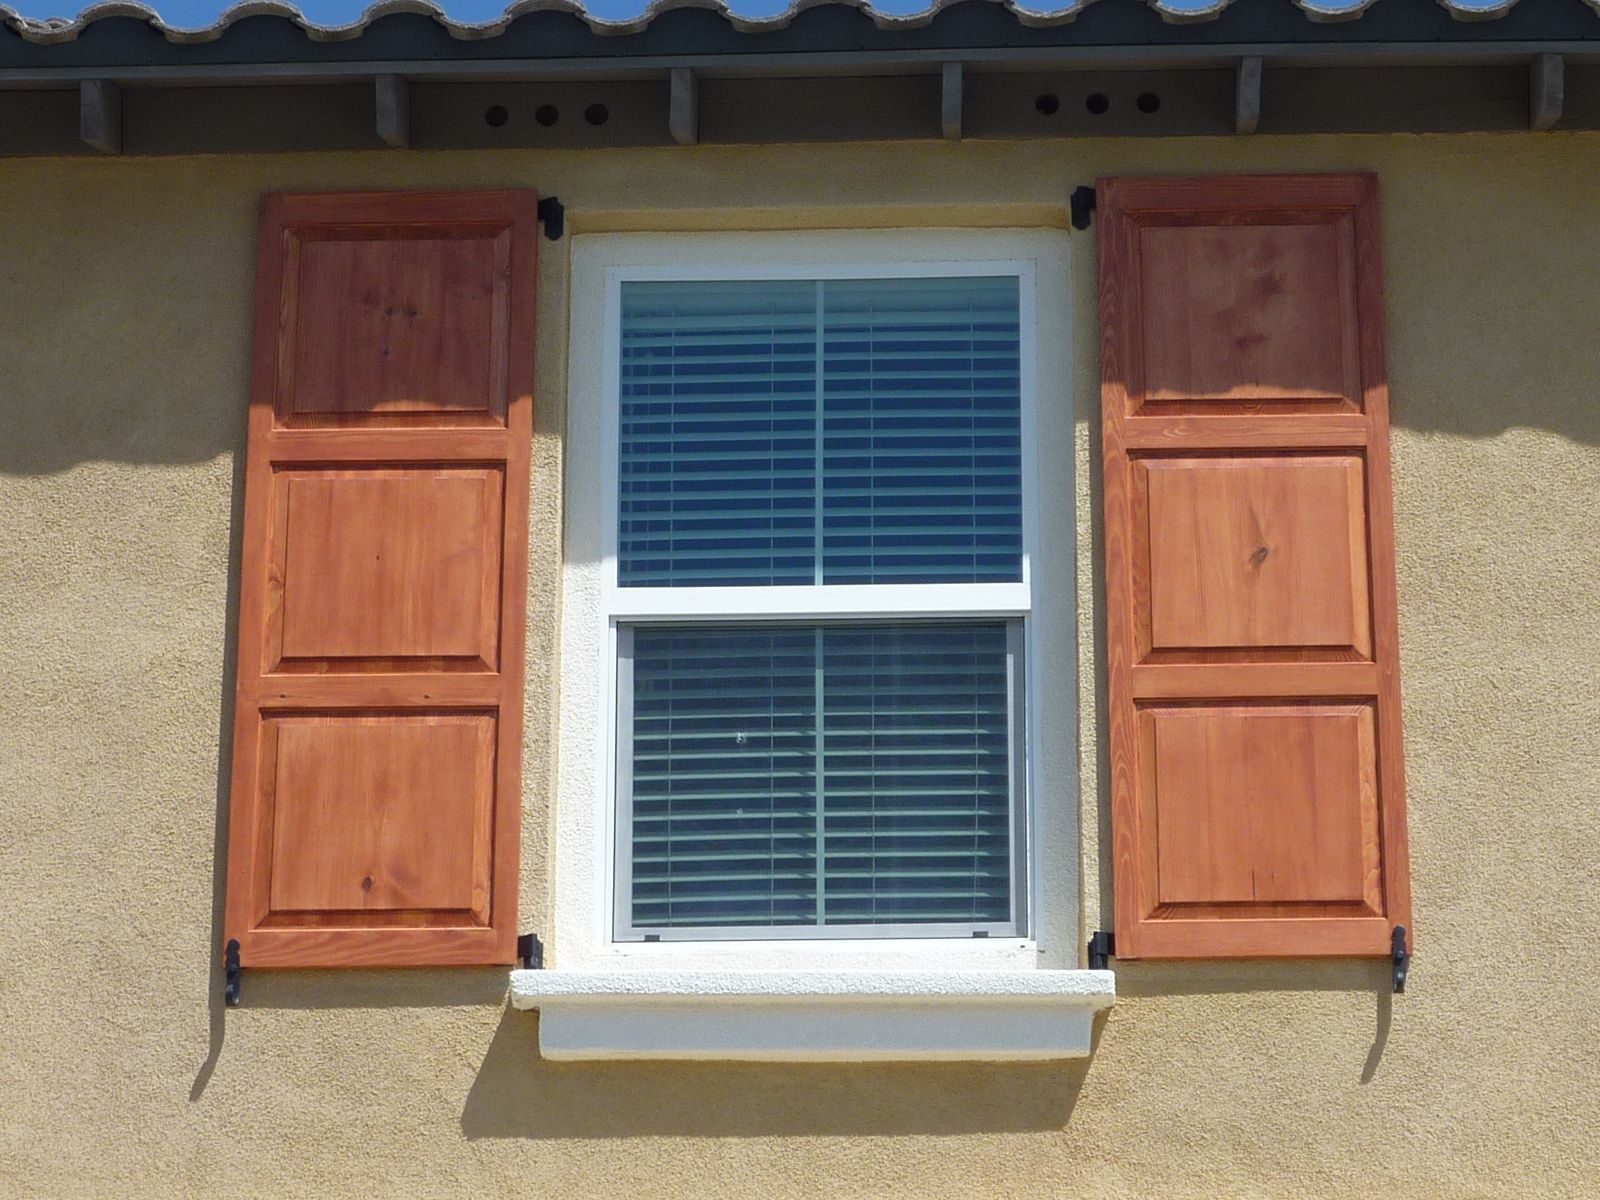 Oak Material Window Appealing Oak Material For Exterior Window Shutters Beside Old Fashioned Window On Concrete Wall Exterior Exterior Window Shutters With Maximum Functional Features